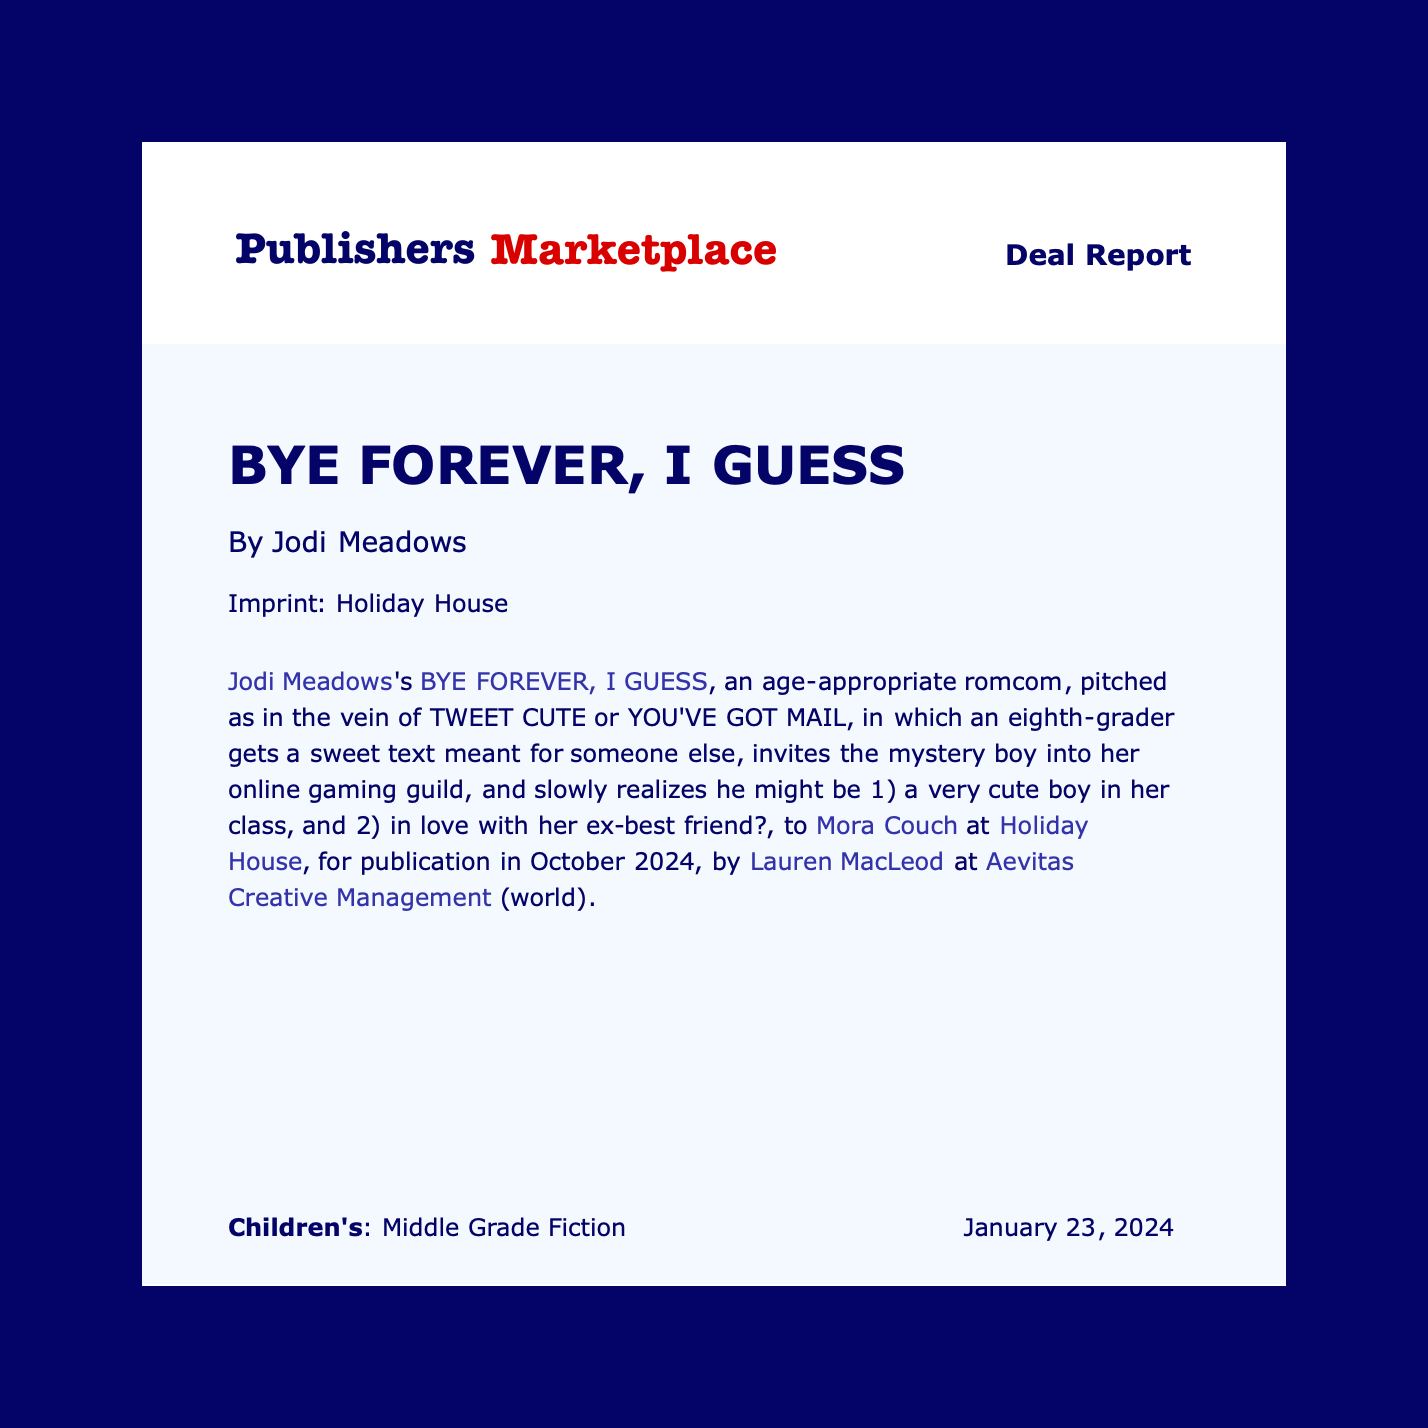 Jodi Meadows's BYE FOREVER, I GUESS, an age-appropriate romcom, pitched as in the vein of TWEET CUTE or YOU'VE GOT MAIL, in which an eighth-grader gets a sweet text meant for someone else, invites the mystery boy into her online gaming guild, and slowly realizes he might be 1) a very cute boy in her class, and 2) in love with her ex-best friend?, to Mora Couch at Holiday House, for publication in October 2024, by Lauren MacLeod at Aevitas Creative Management (world).